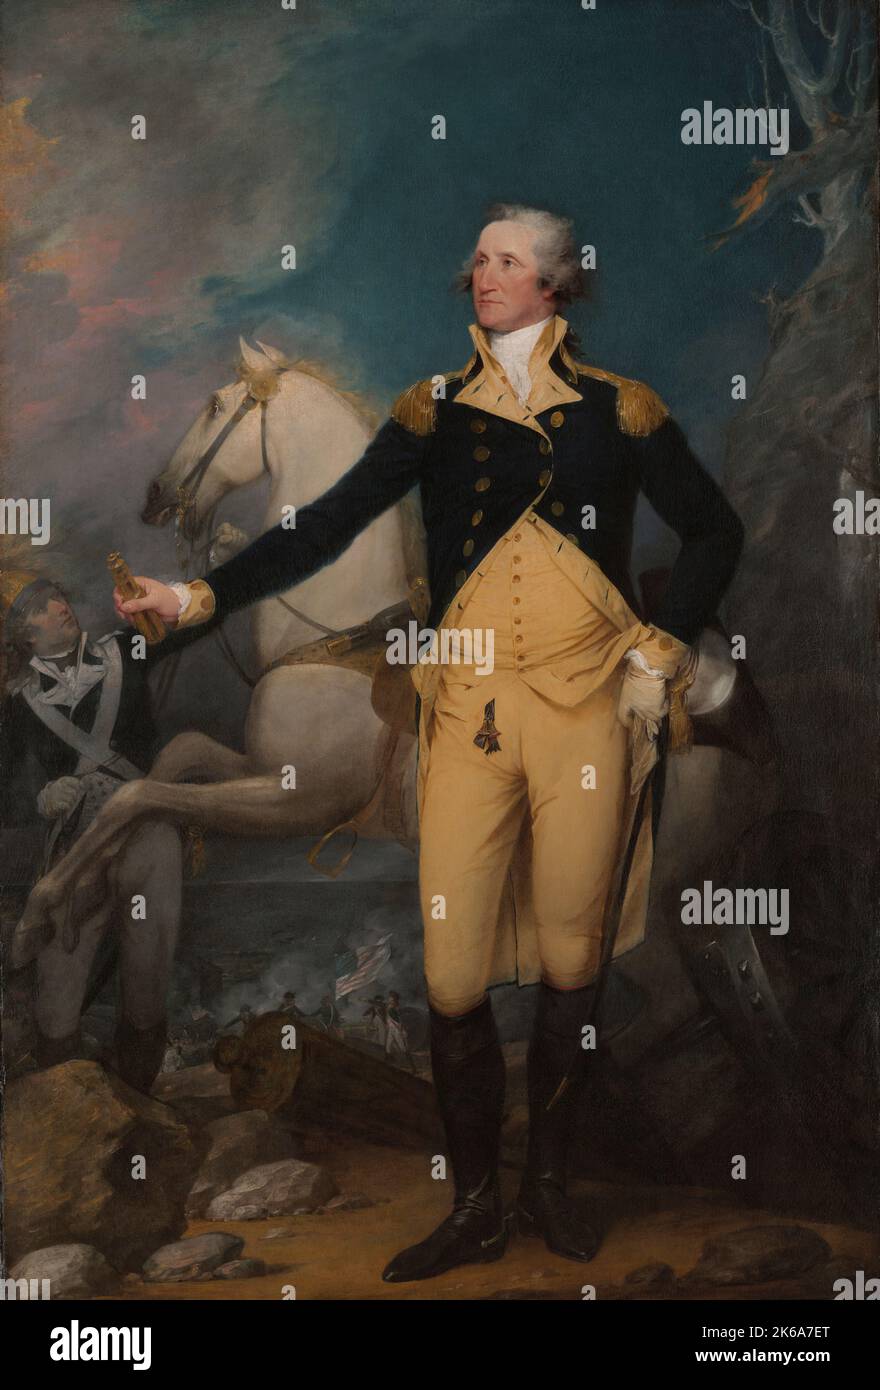 18th century painting of General George Washington at night after the Battle of Assunpink Creek. Stock Photo